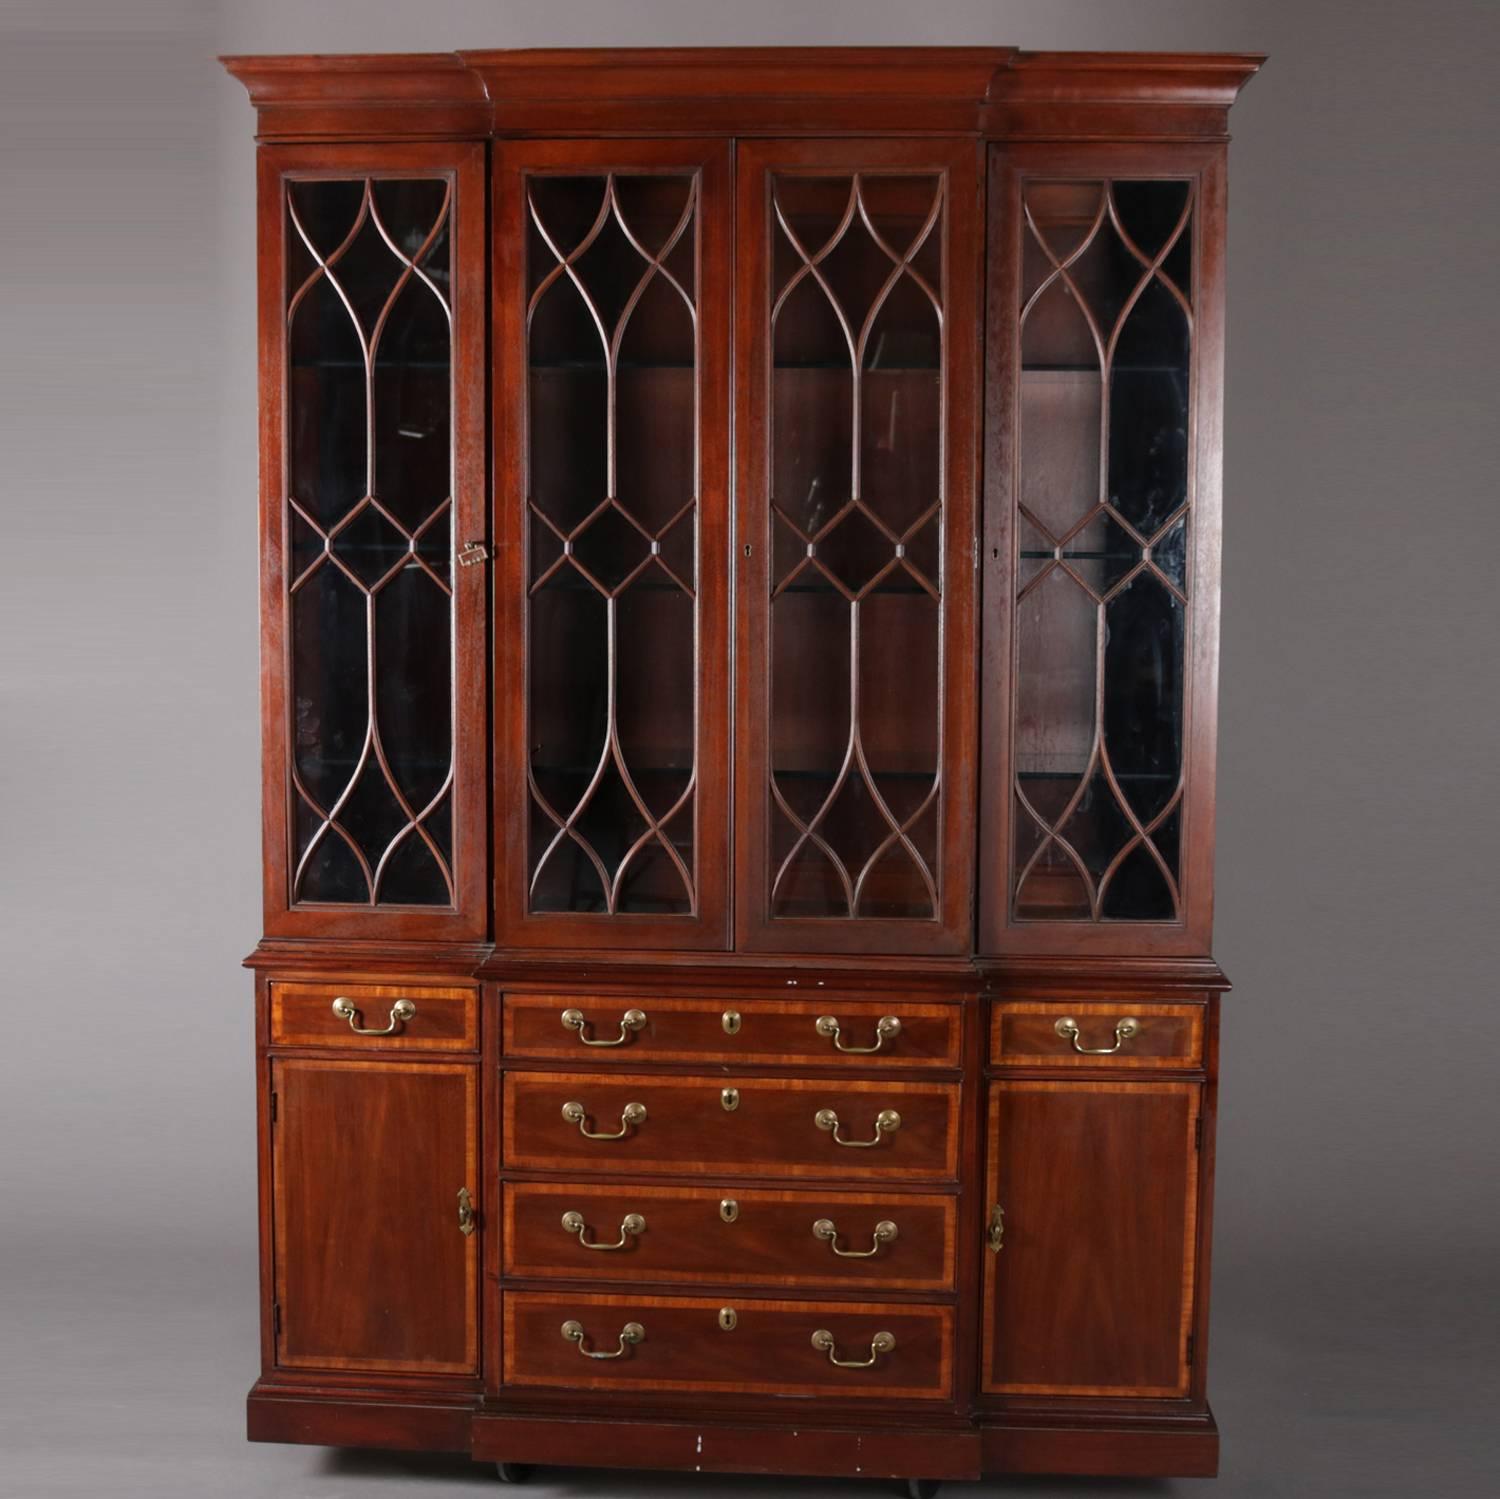 Kittinger school breakfront features mahogany construction with satinwood inlaid banding, four door upper china cabinet with adjustable shelves; lower with three upper drawers over three lower drawers with flanking side cabinets; locking and with